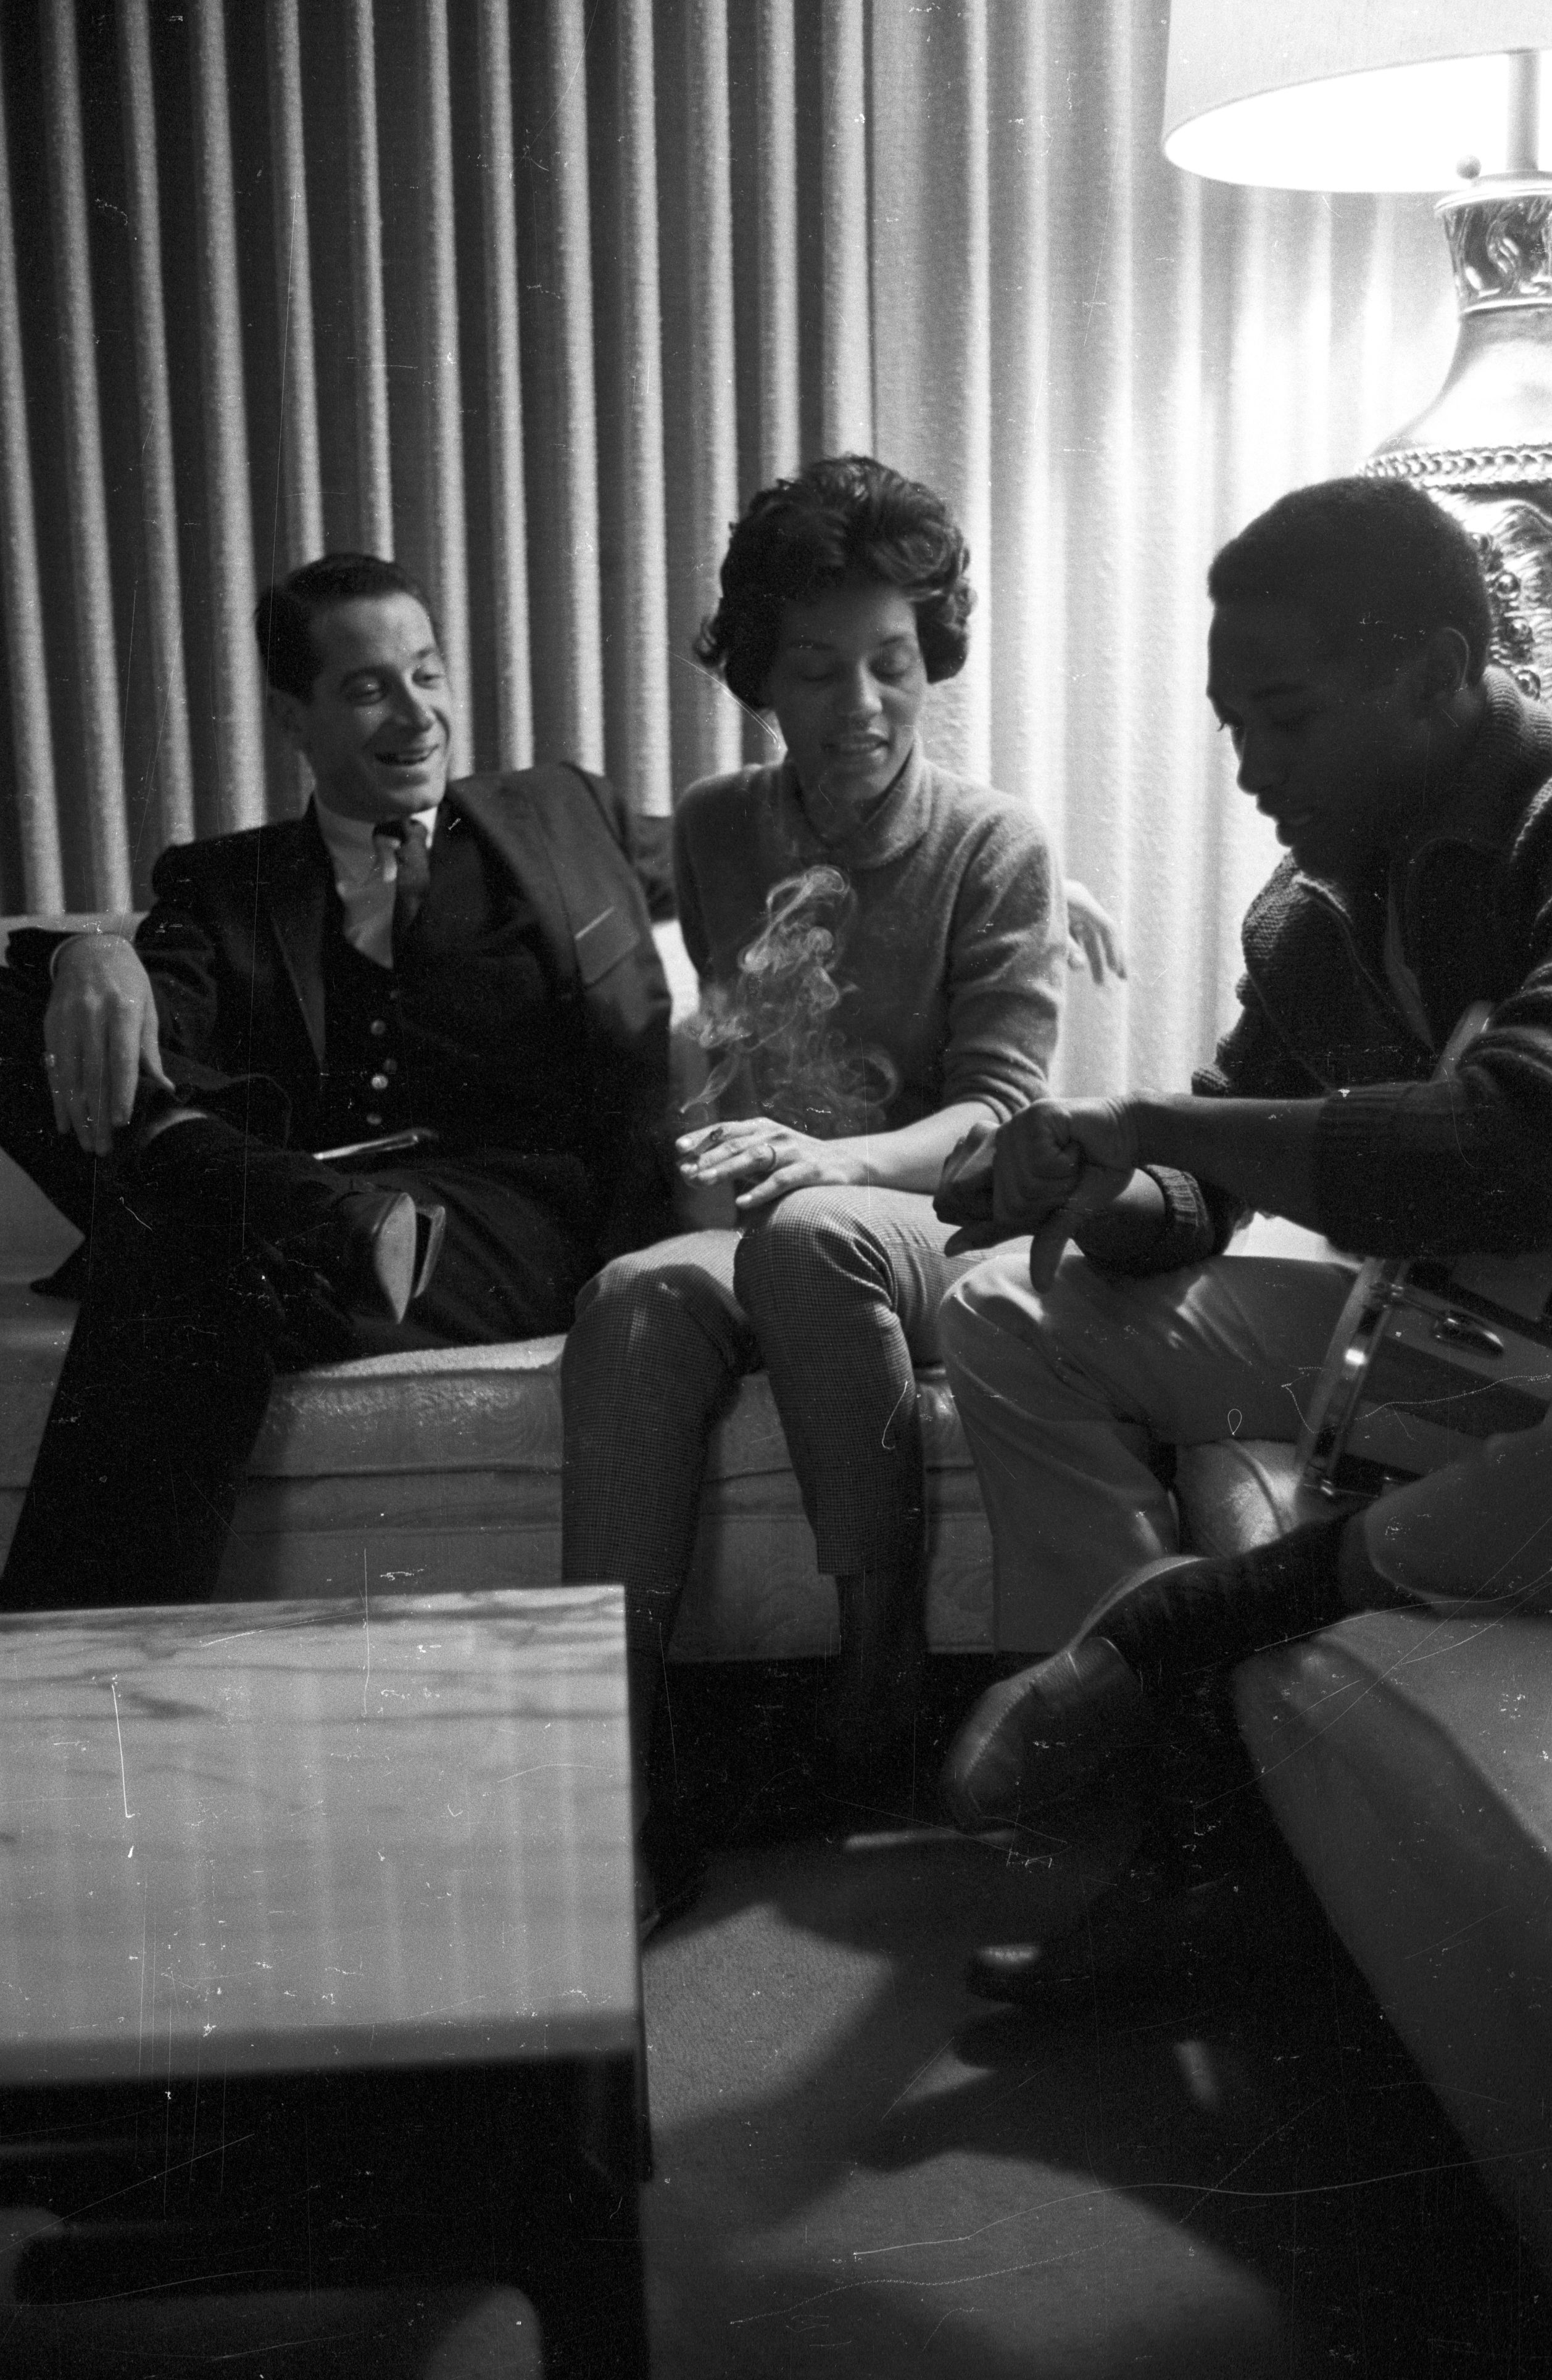 Sam Cooke (right), his wife Barbara Cooke and a man (perhaps their lawyer Walter Hurst) on November 30, 1960 in Los Angeles, California. | Source: Getty Images